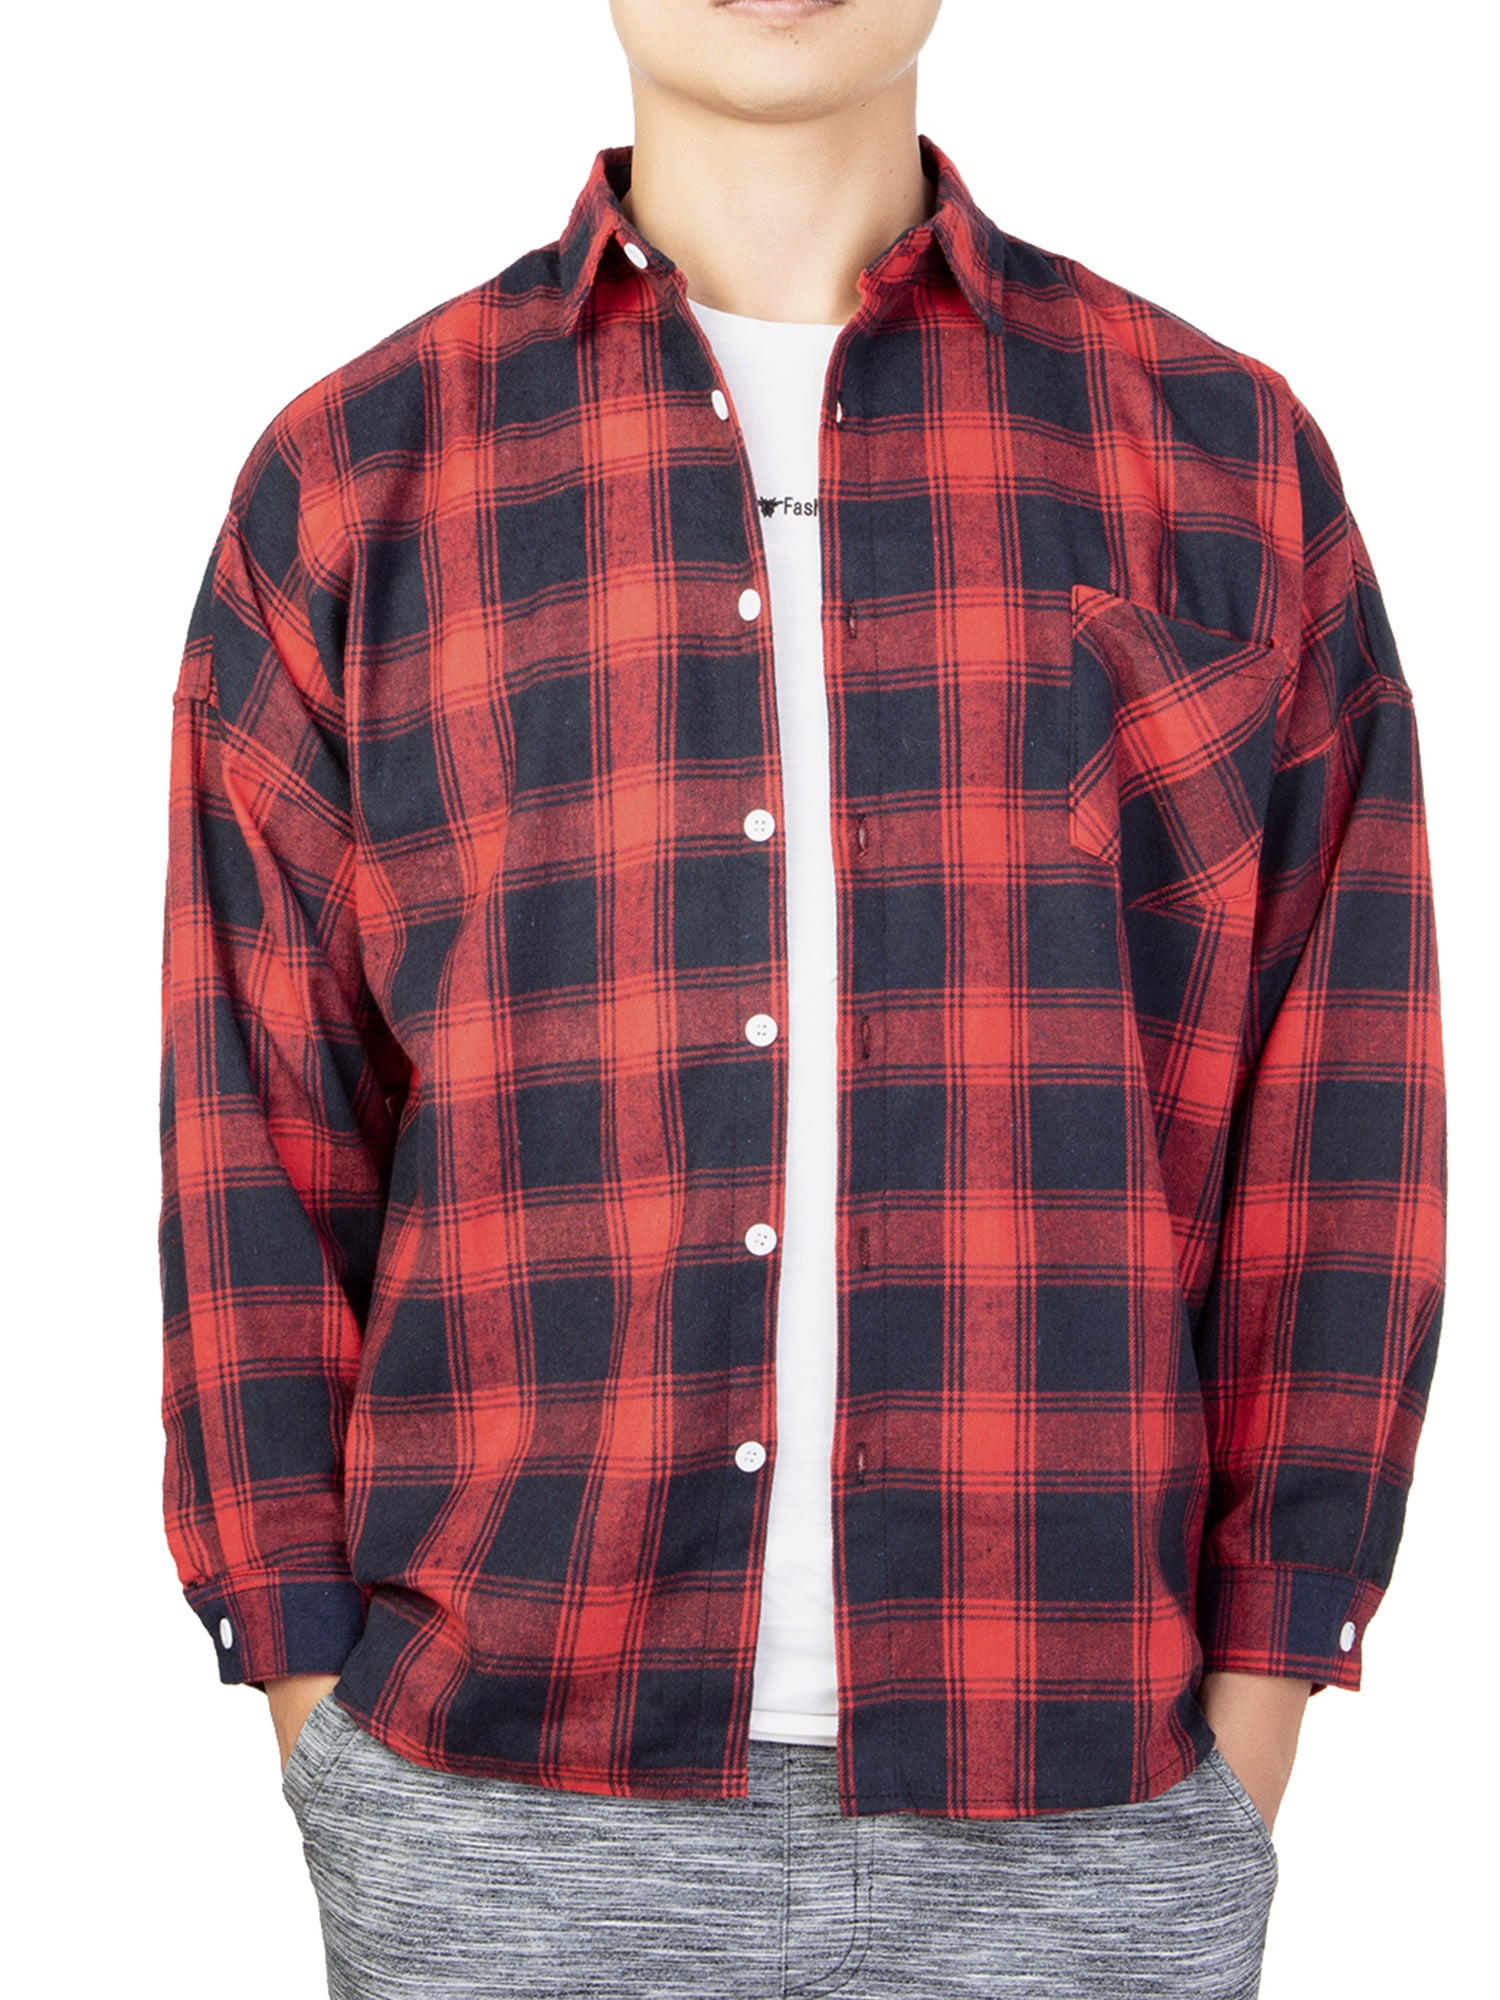 Men's Long Sleeve Flannel Casual Formal Check Print Cotton Work Plaid Shirt Tos 